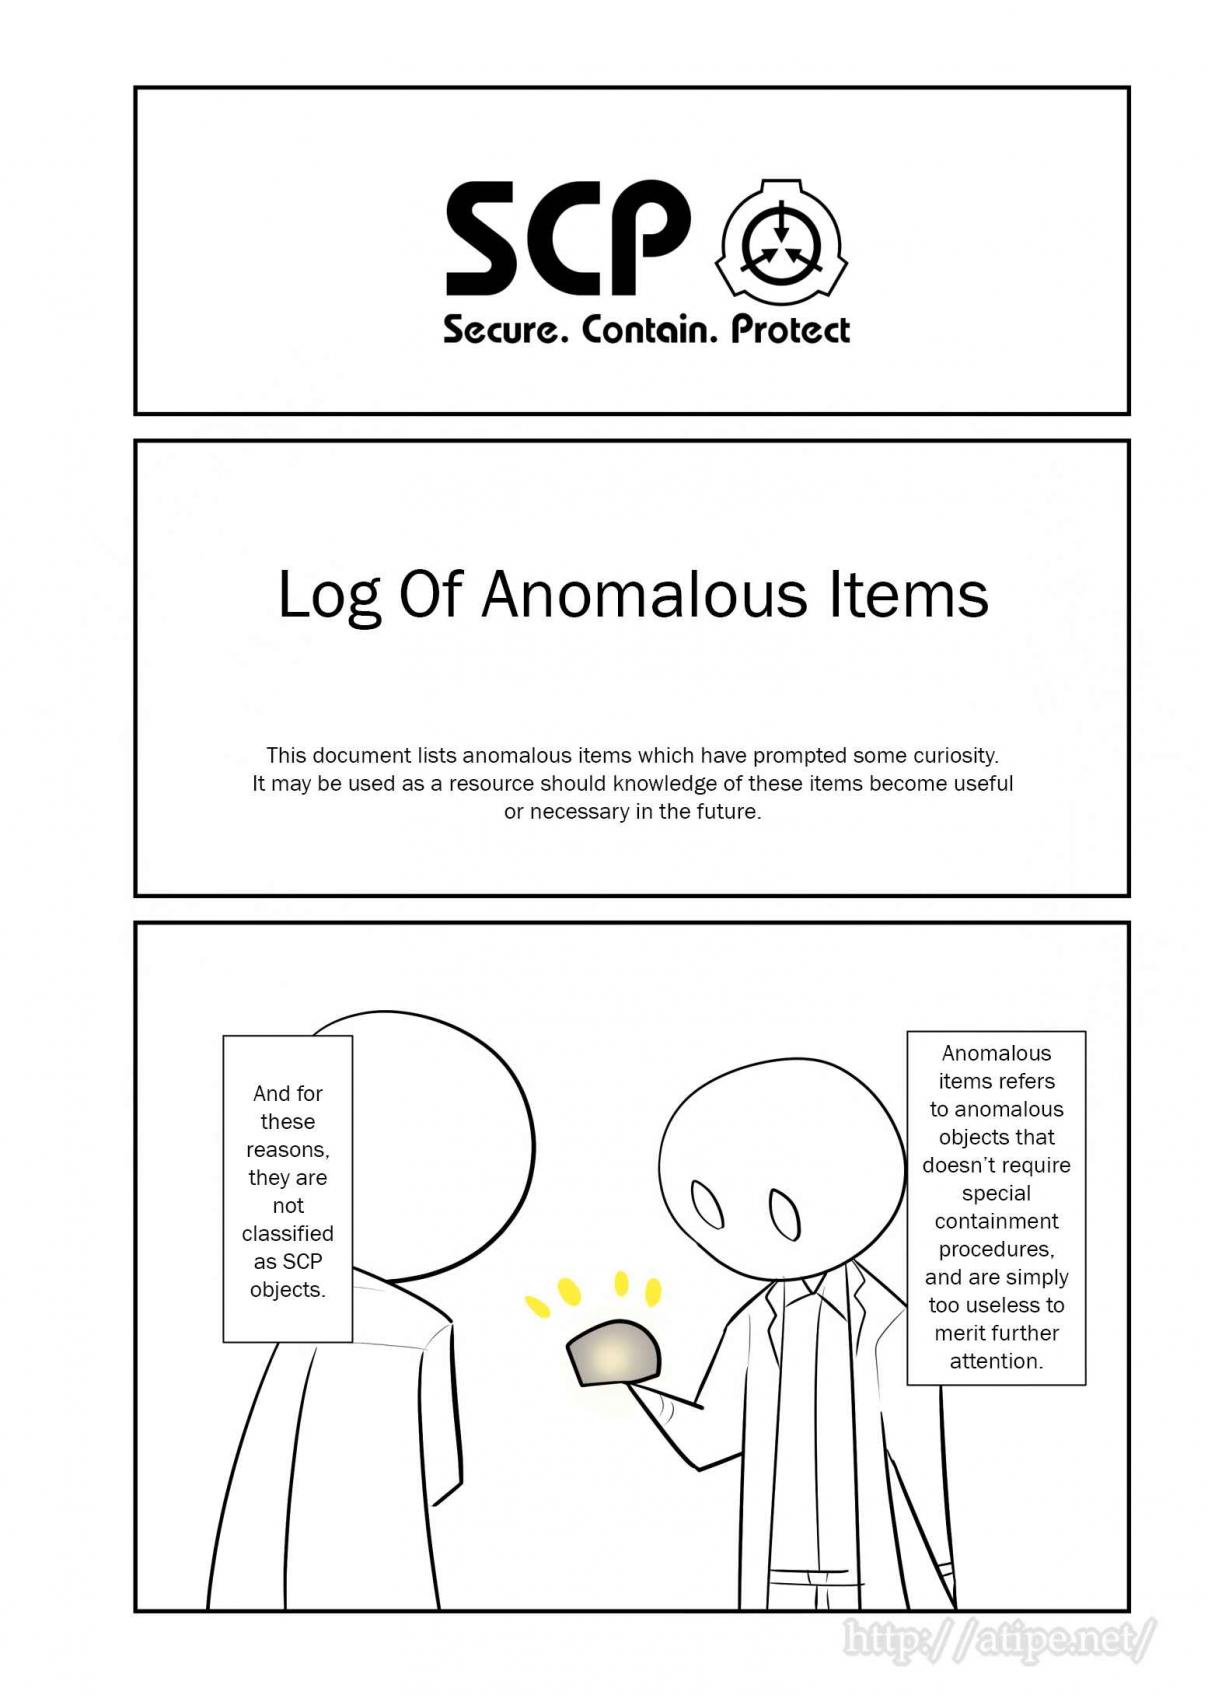 Oversimplified SCP Ch. 77 Log Of Anomalous Items